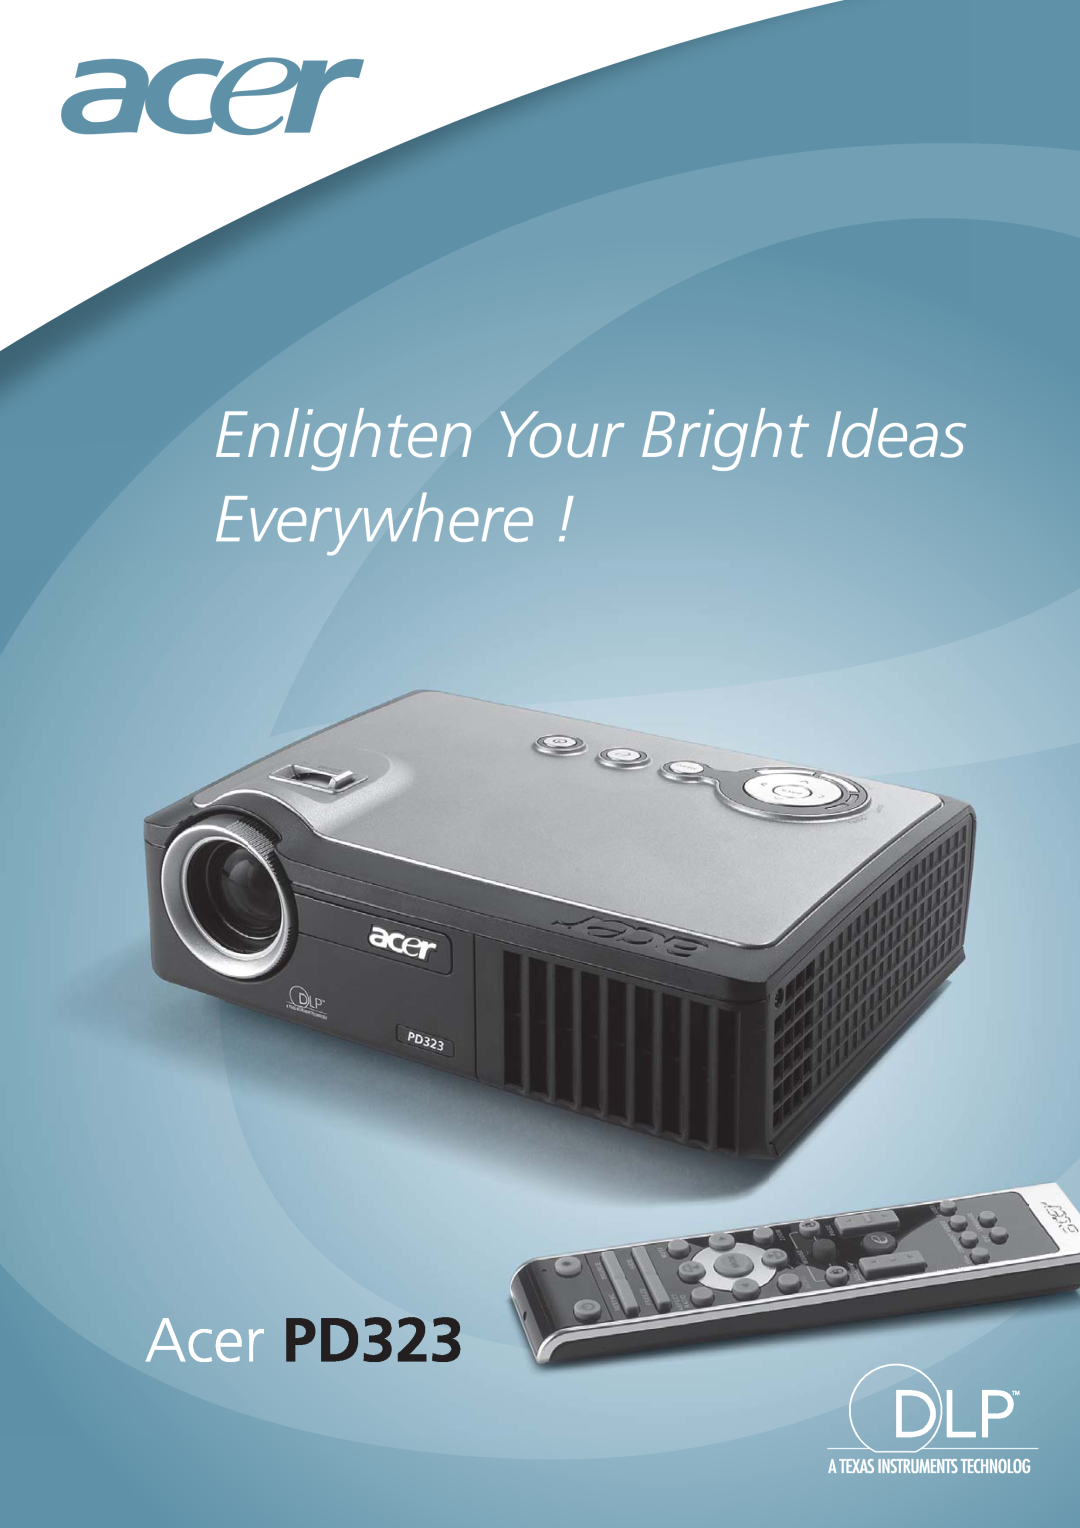 Acer PD 323 manual Enlighten Your Bright Ideas, Everywhere, Acer PD323 